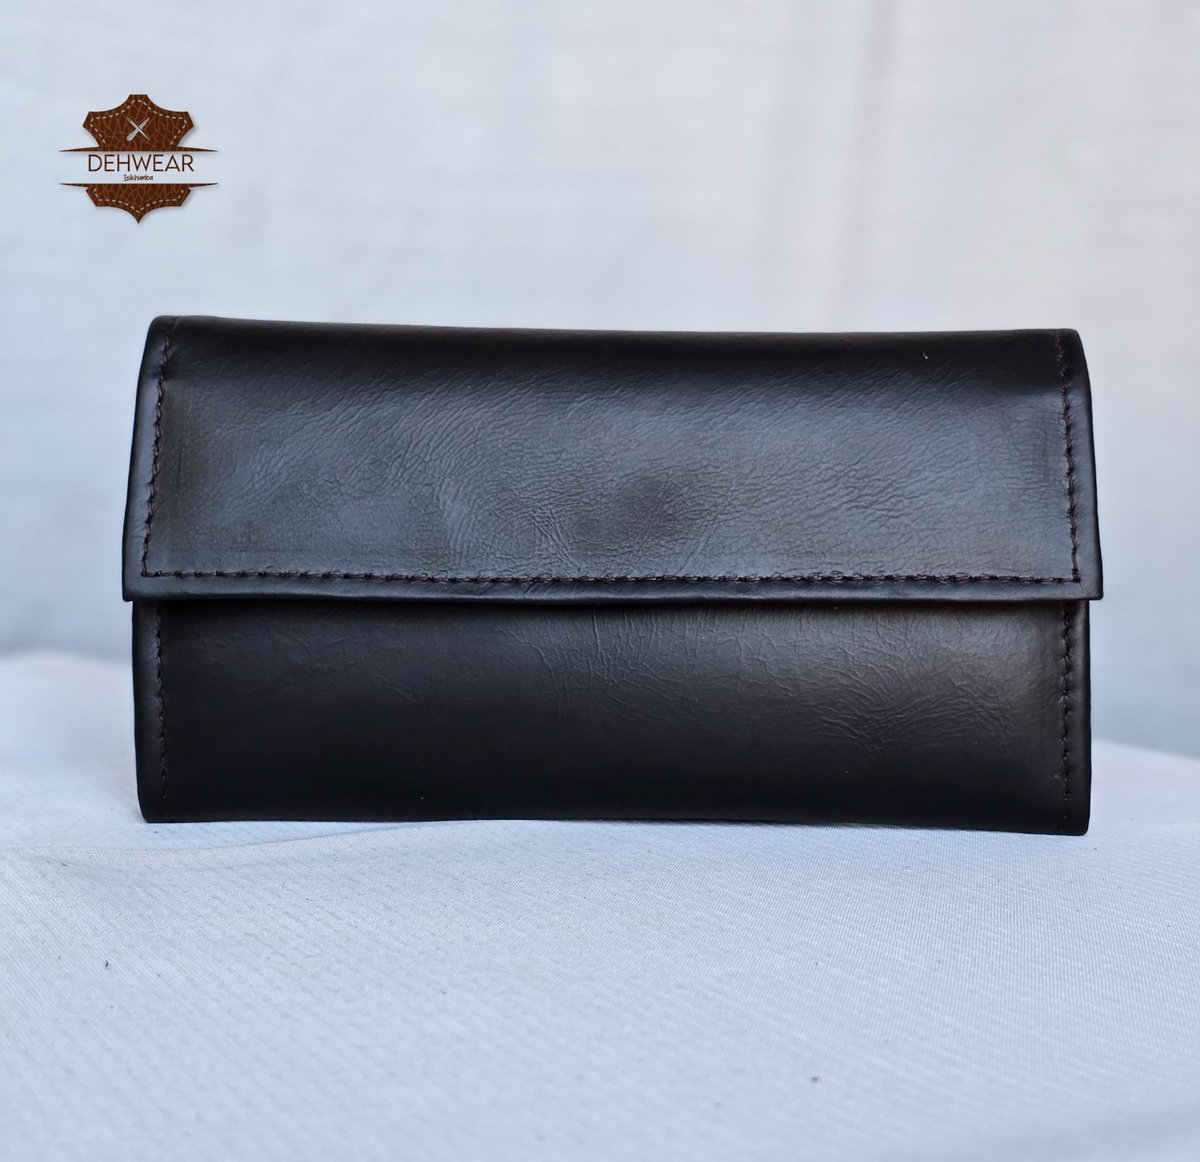 Ladies' Leather Wallets $30 +263718119824 [Munya] Location Eastgate Market Shop G15 [Inside the Mall] We deliver to every location in Zimbabwe WhatsApp Catalogue wa.me/c/263718119824 #Dehwear #Isikhumba #HandmadeInZW